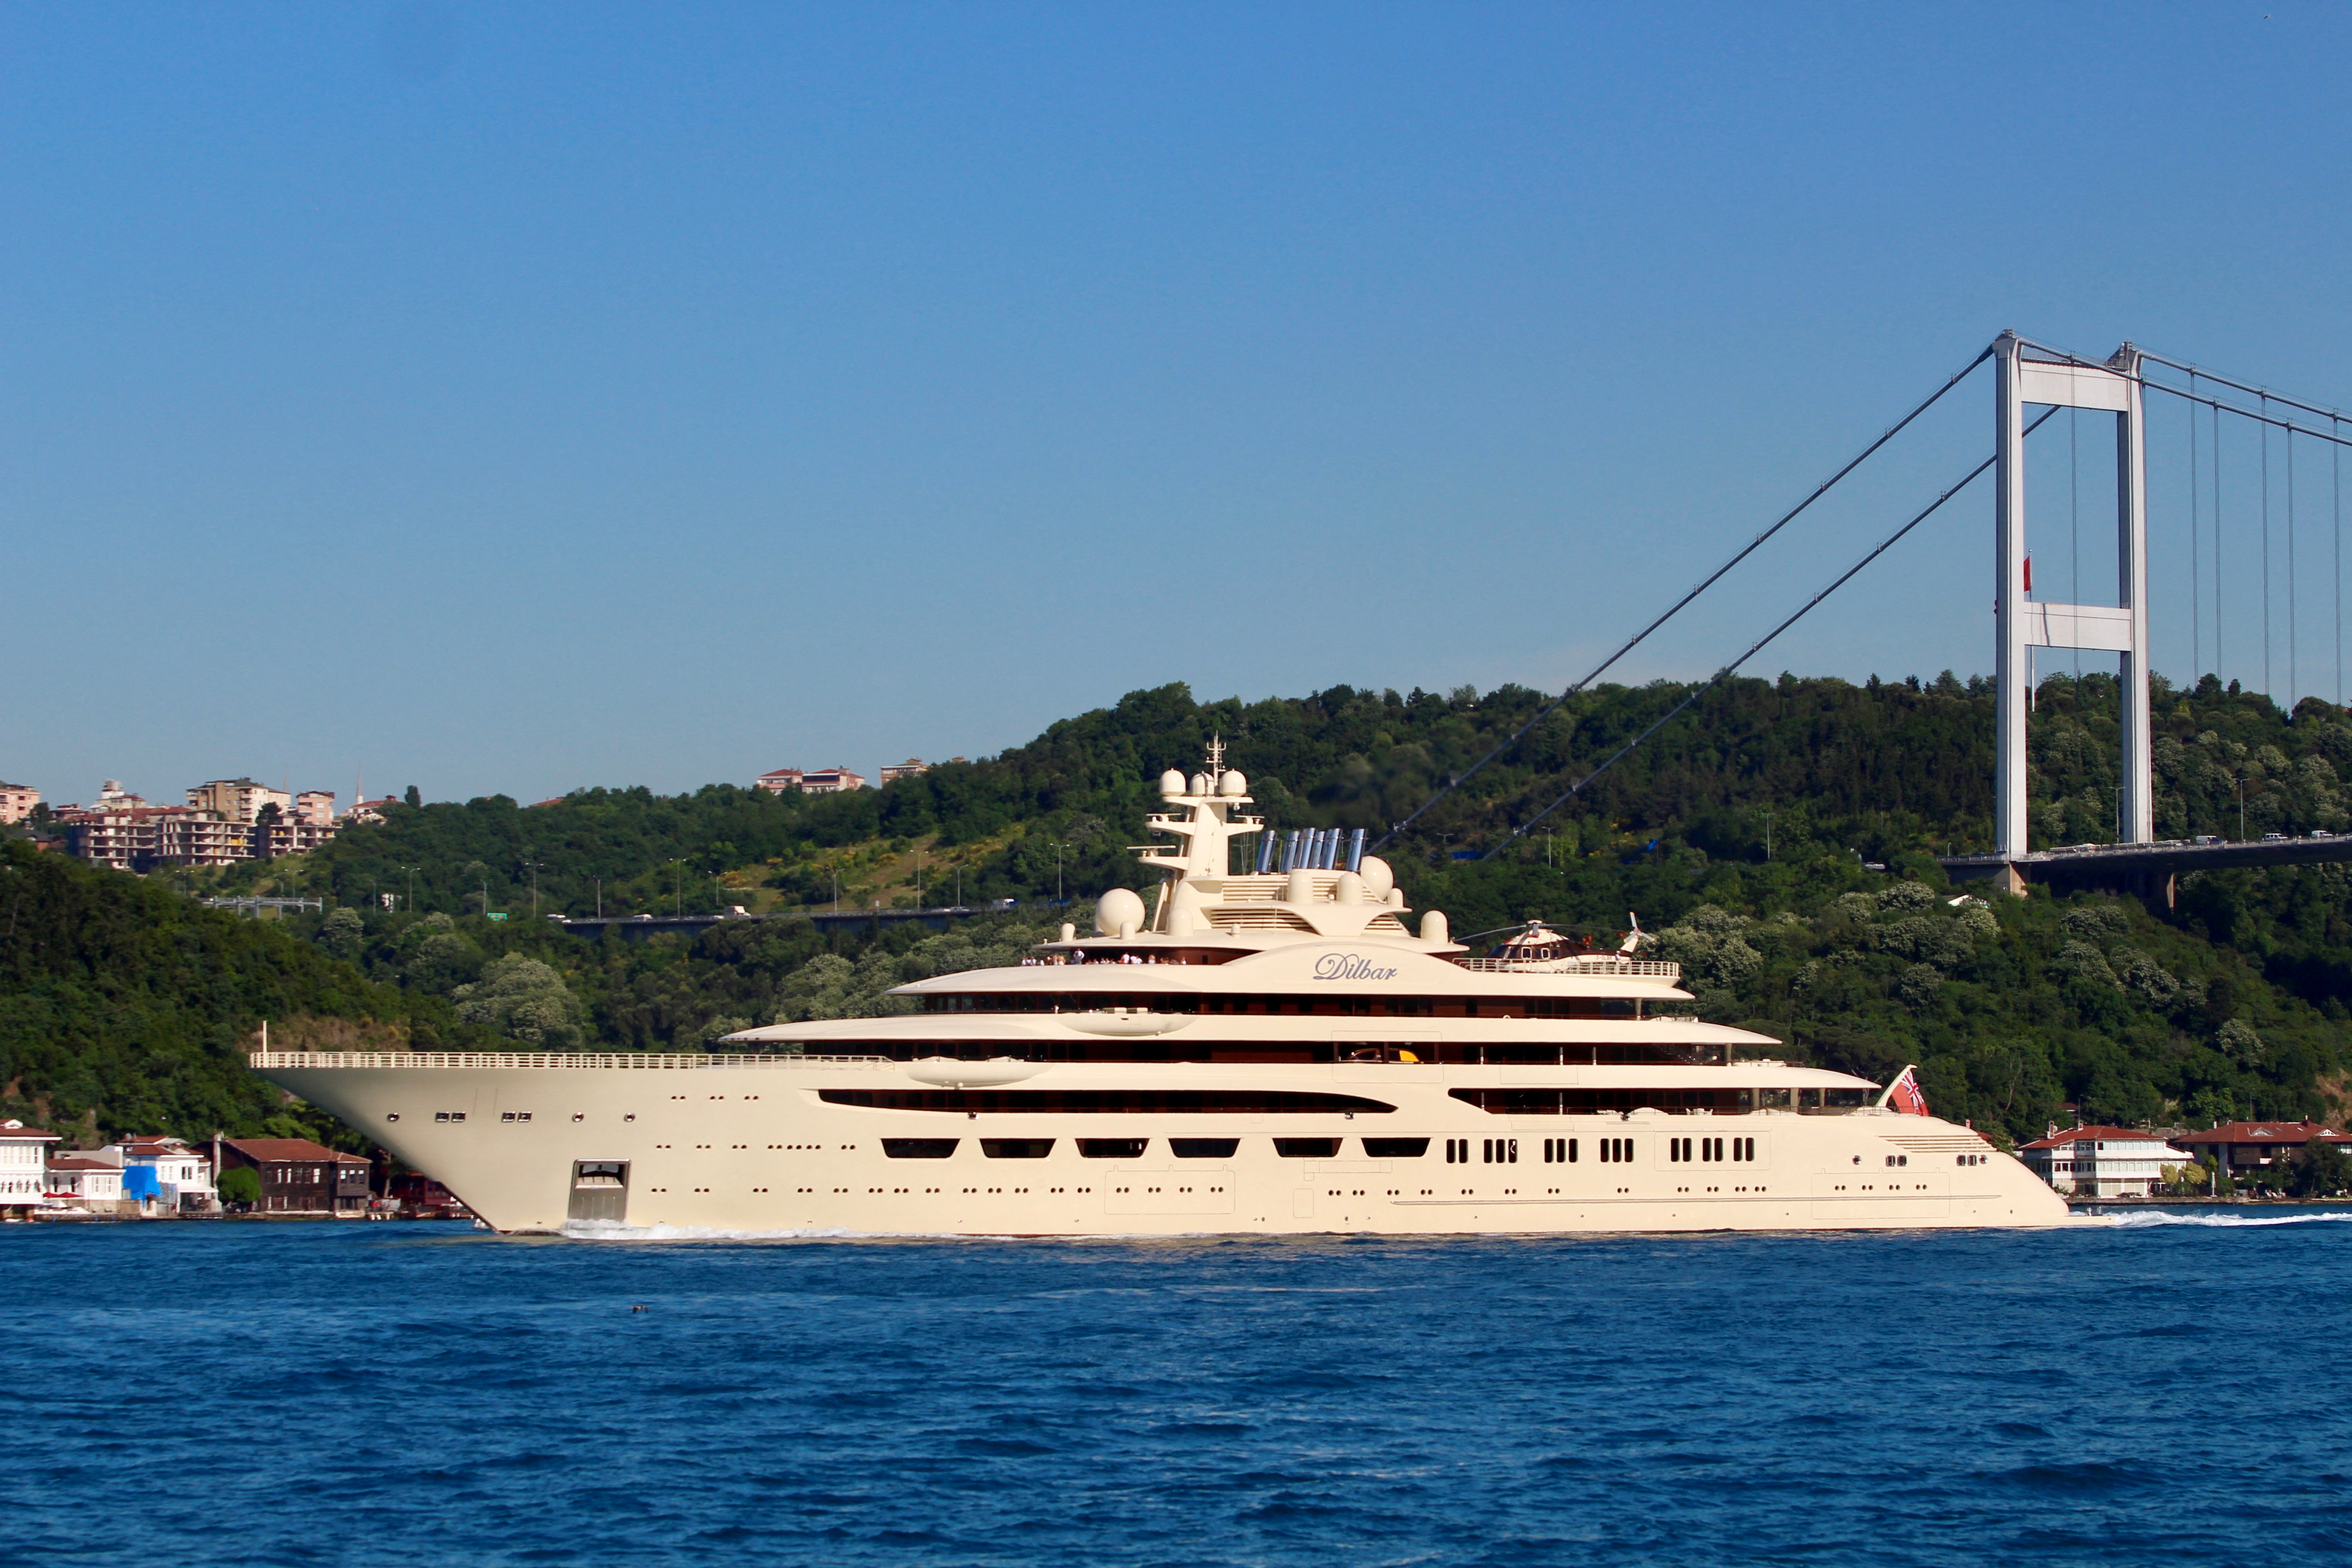 The Dilbar, a luxury yacht owned by Russian billionaire Alisher Usmanov, sails in Istanbul's Bosphorus